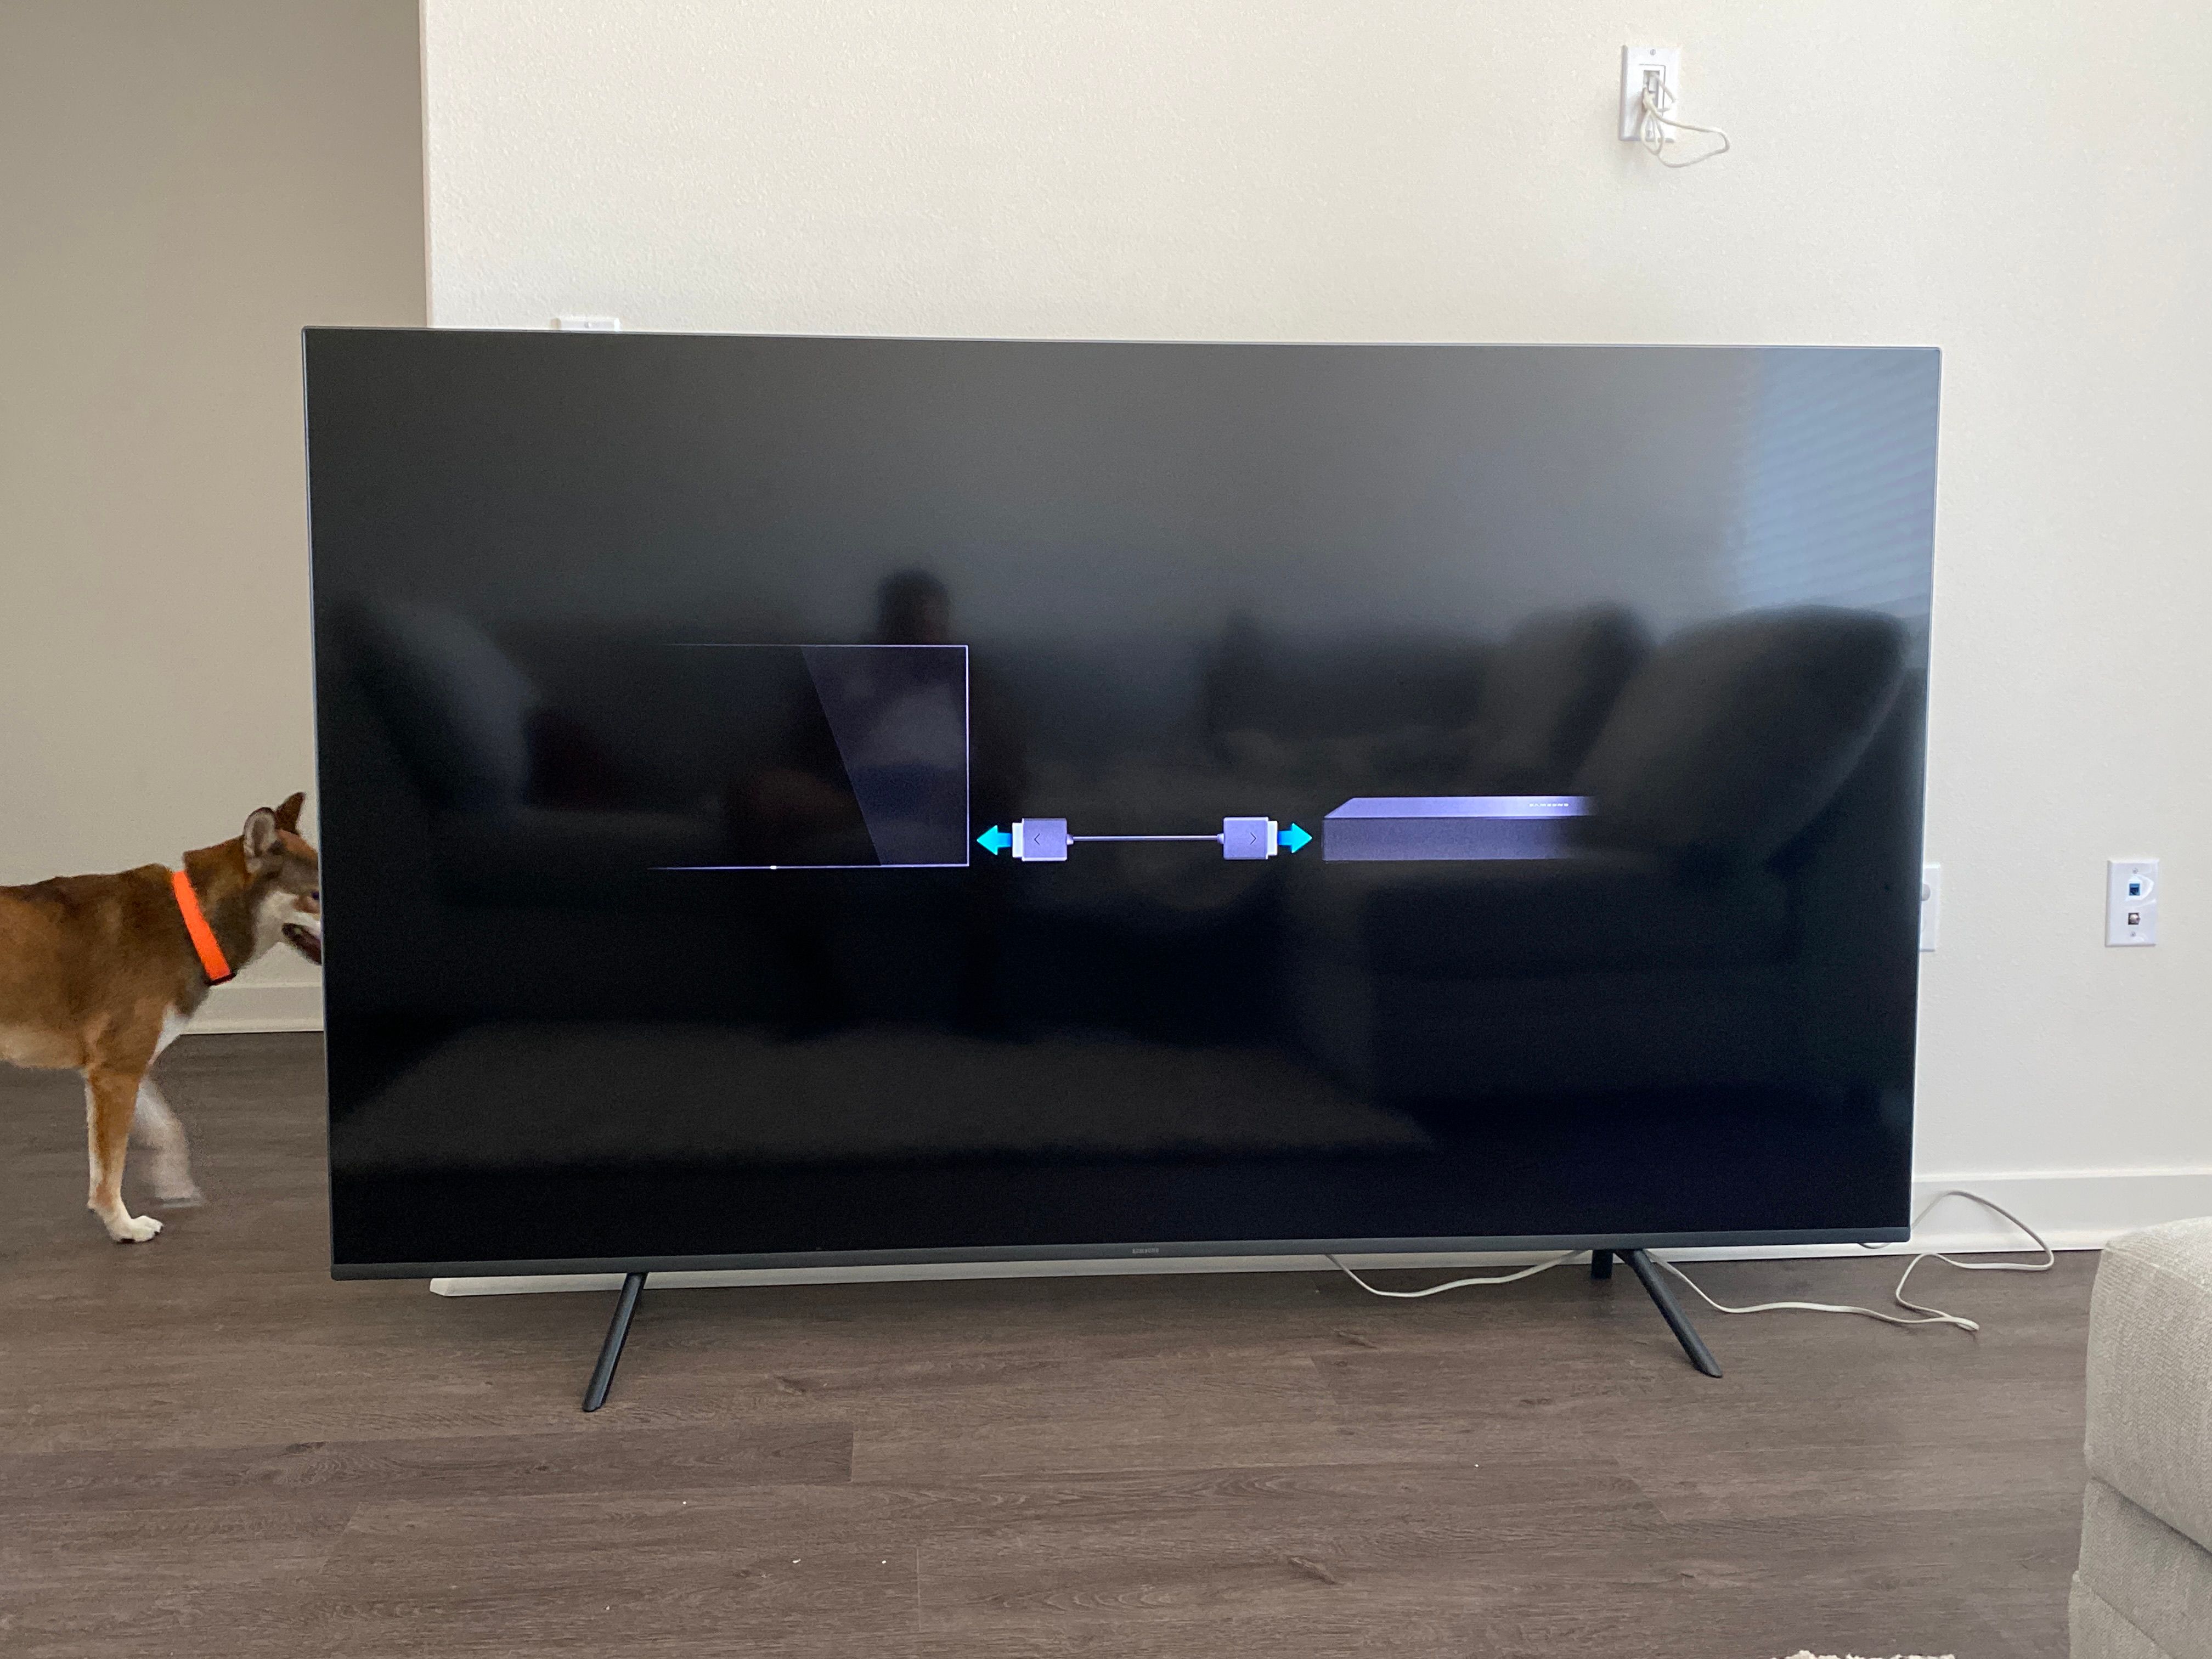 Solved: Television stuck on this screen - Samsung Community